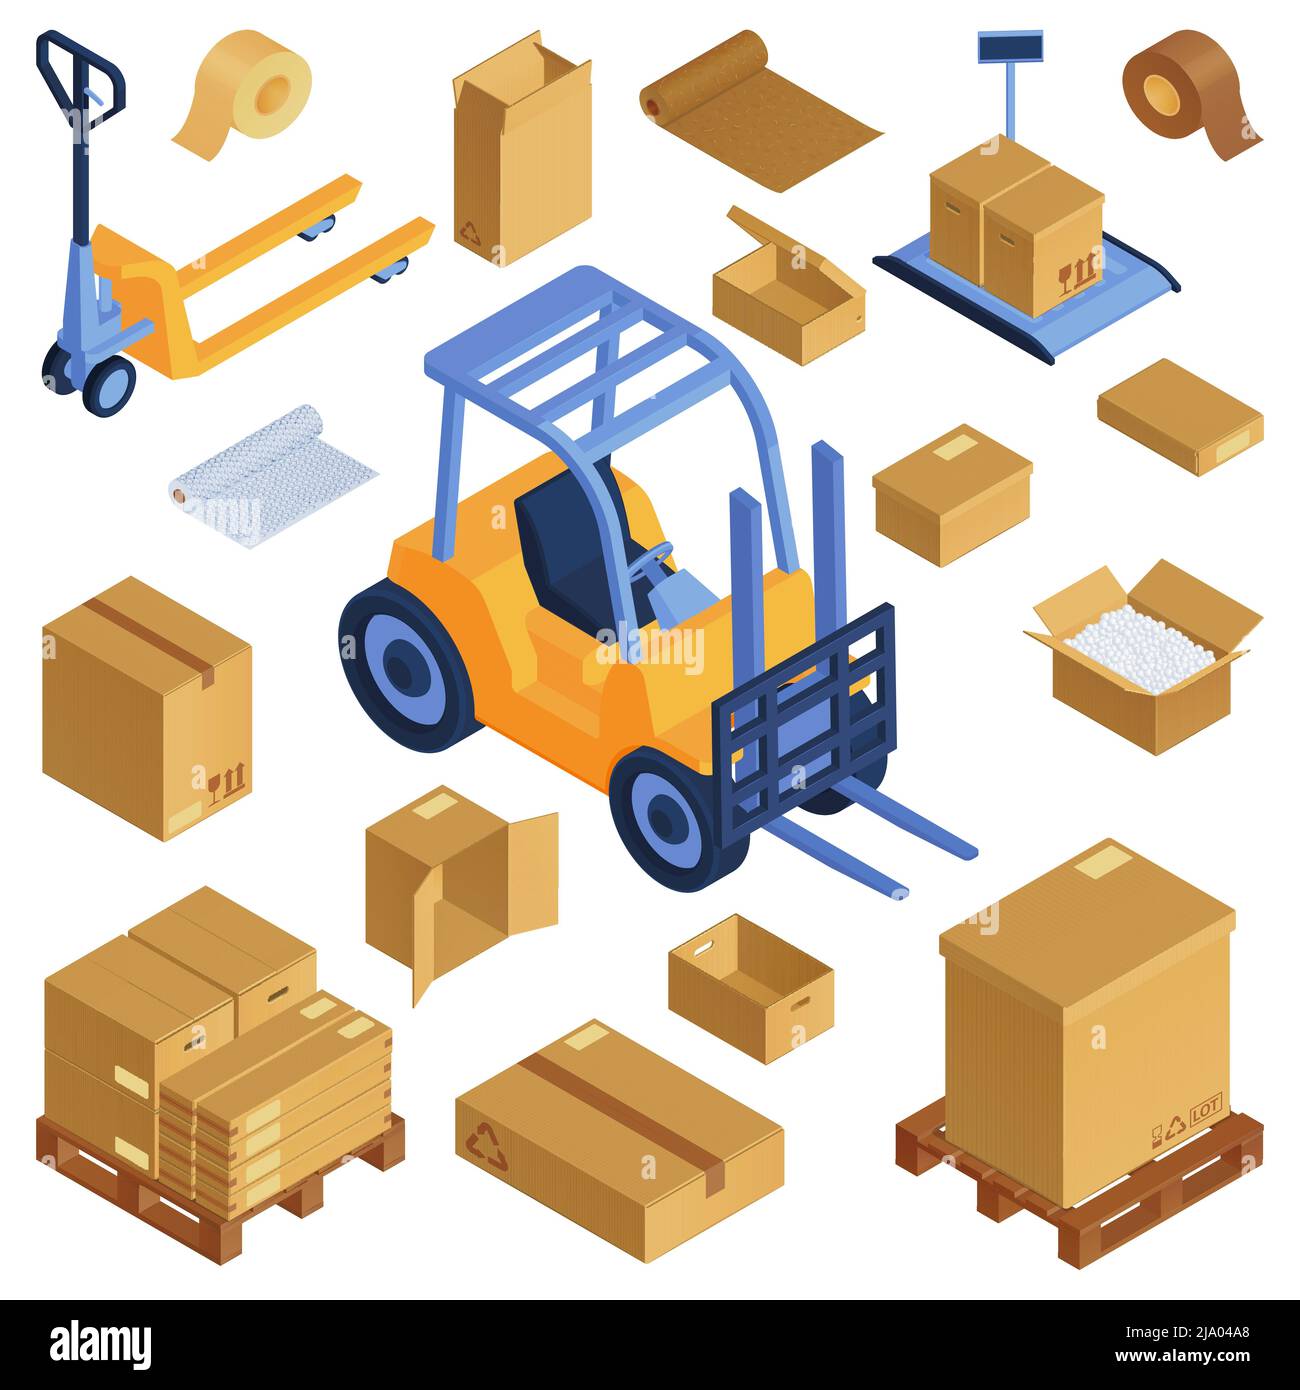 Isometric cardboard boxes pallet loader set with isolated icons of carton packs and image of forklift vector illustration Stock Vector